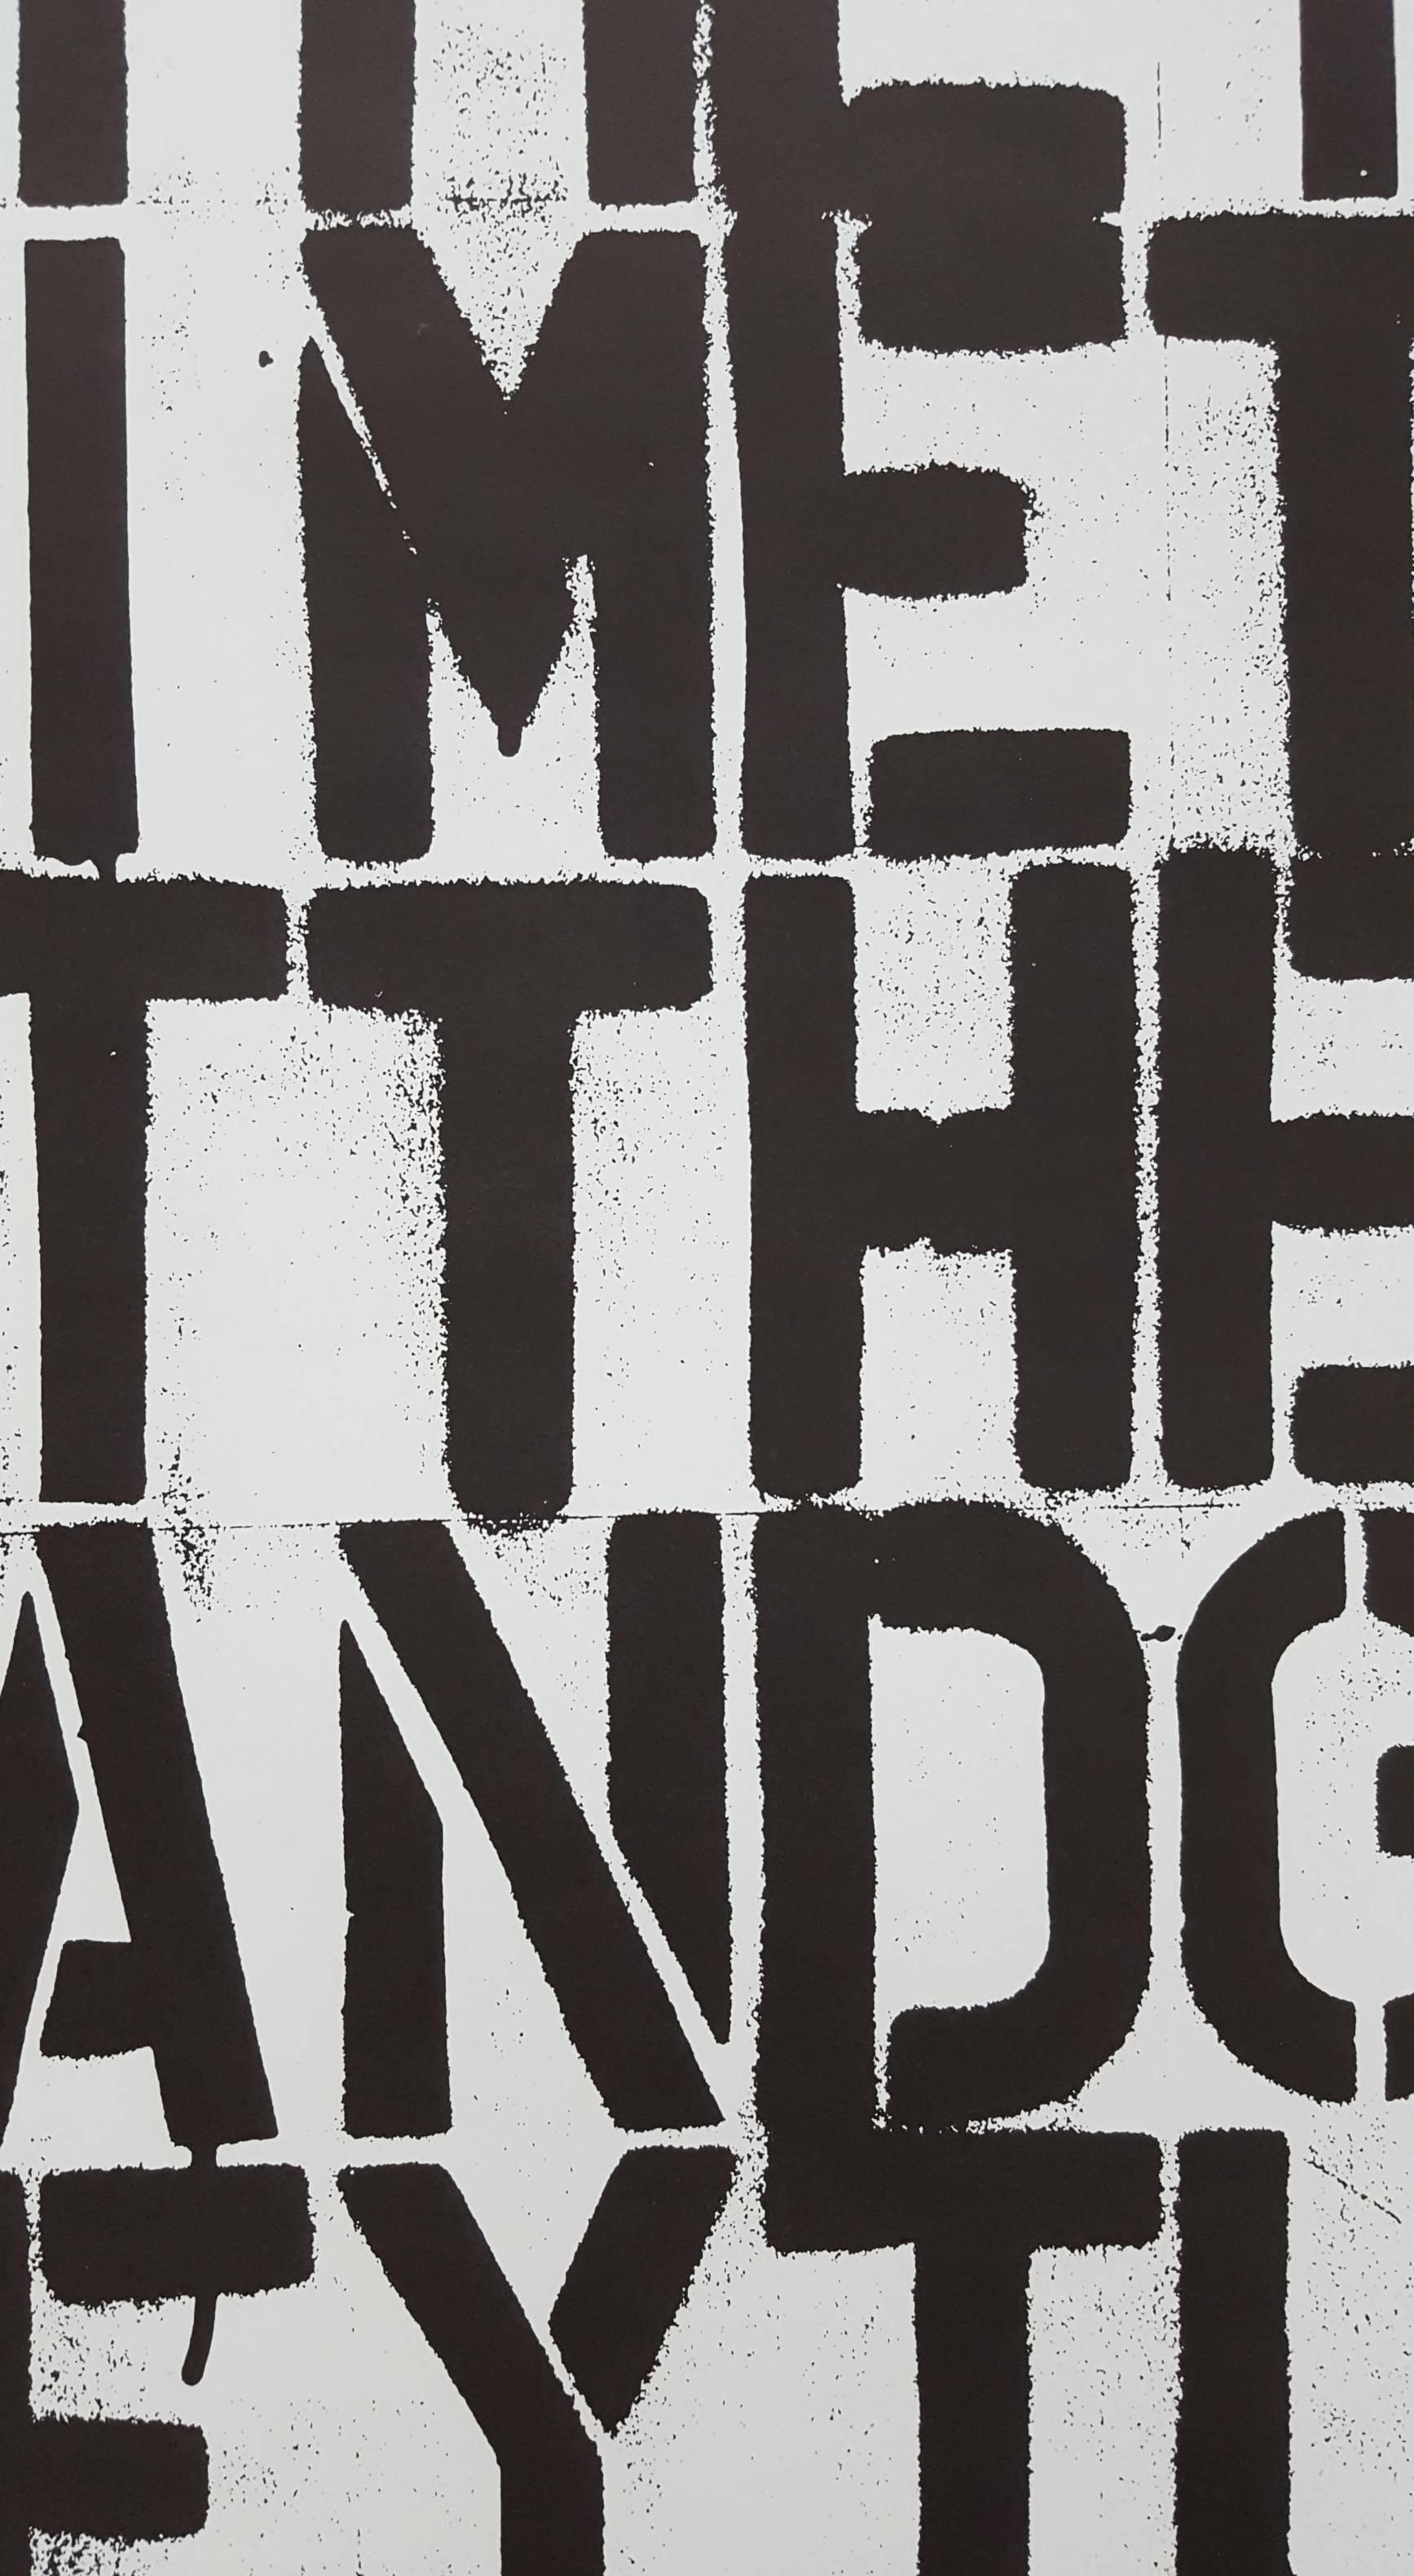 christopher wool the show is over poster